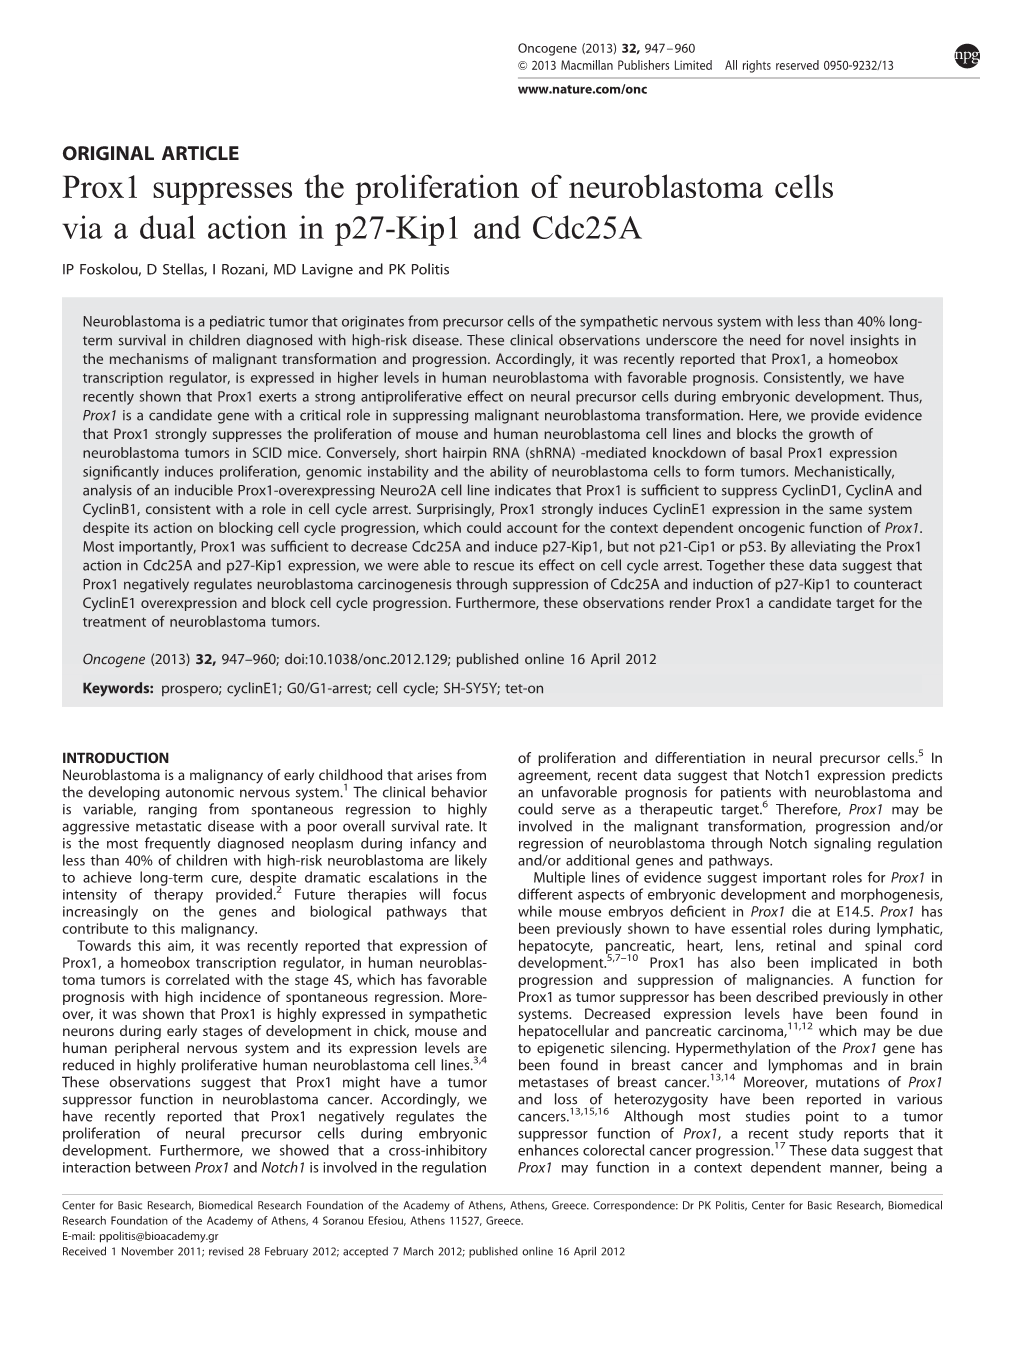 Prox1 Suppresses the Proliferation of Neuroblastoma Cells Via a Dual Action in P27-Kip1 and Cdc25a